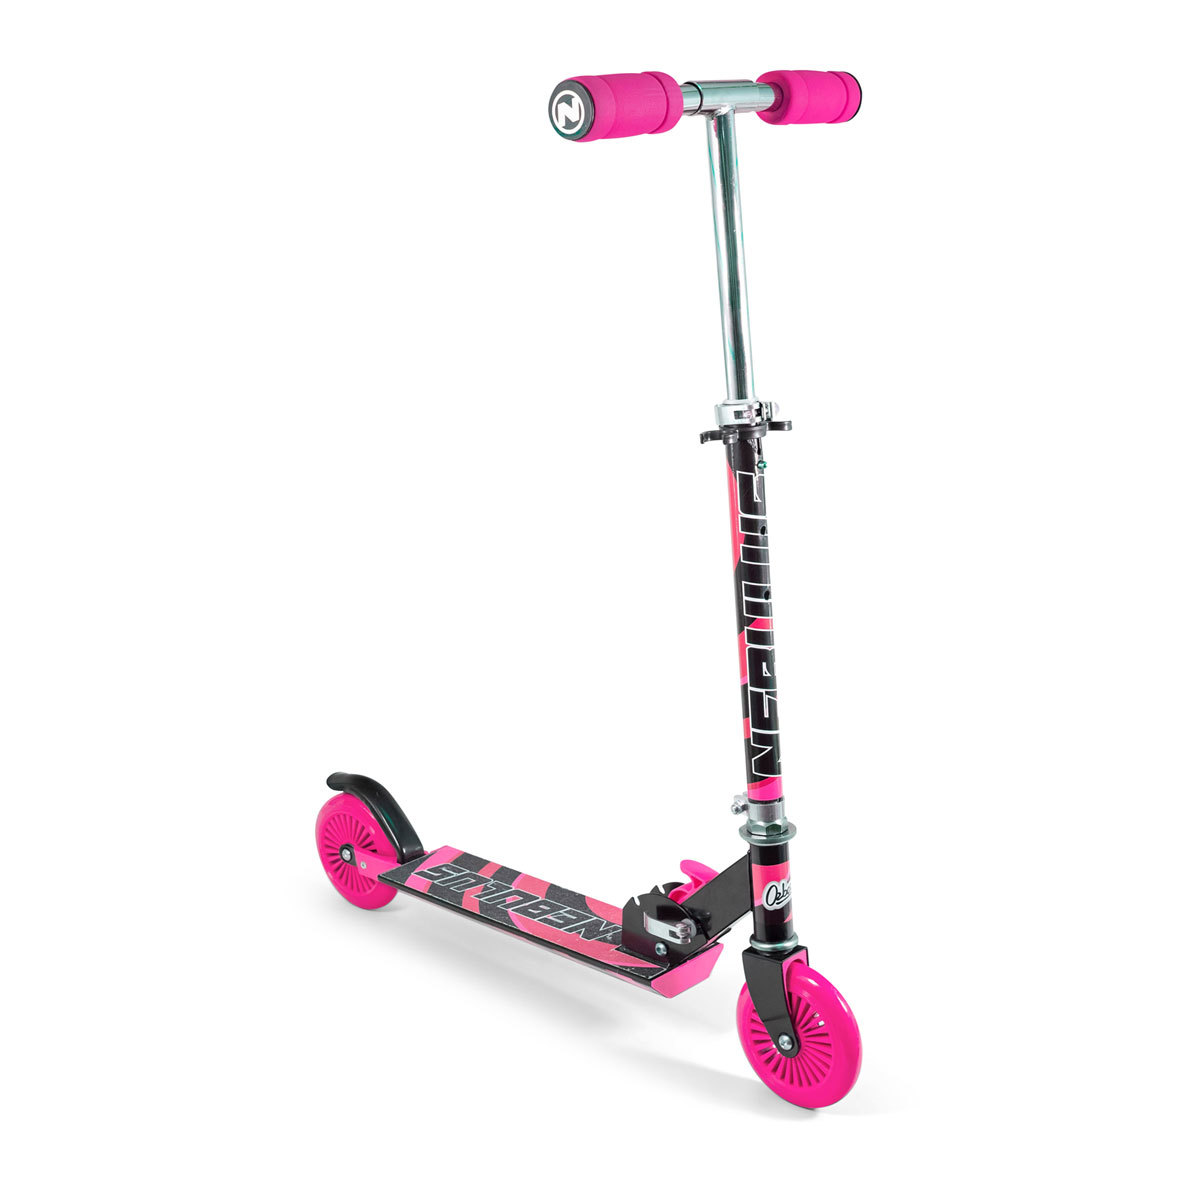  Nebulus Scooter - Black with Pink Chrome Finish